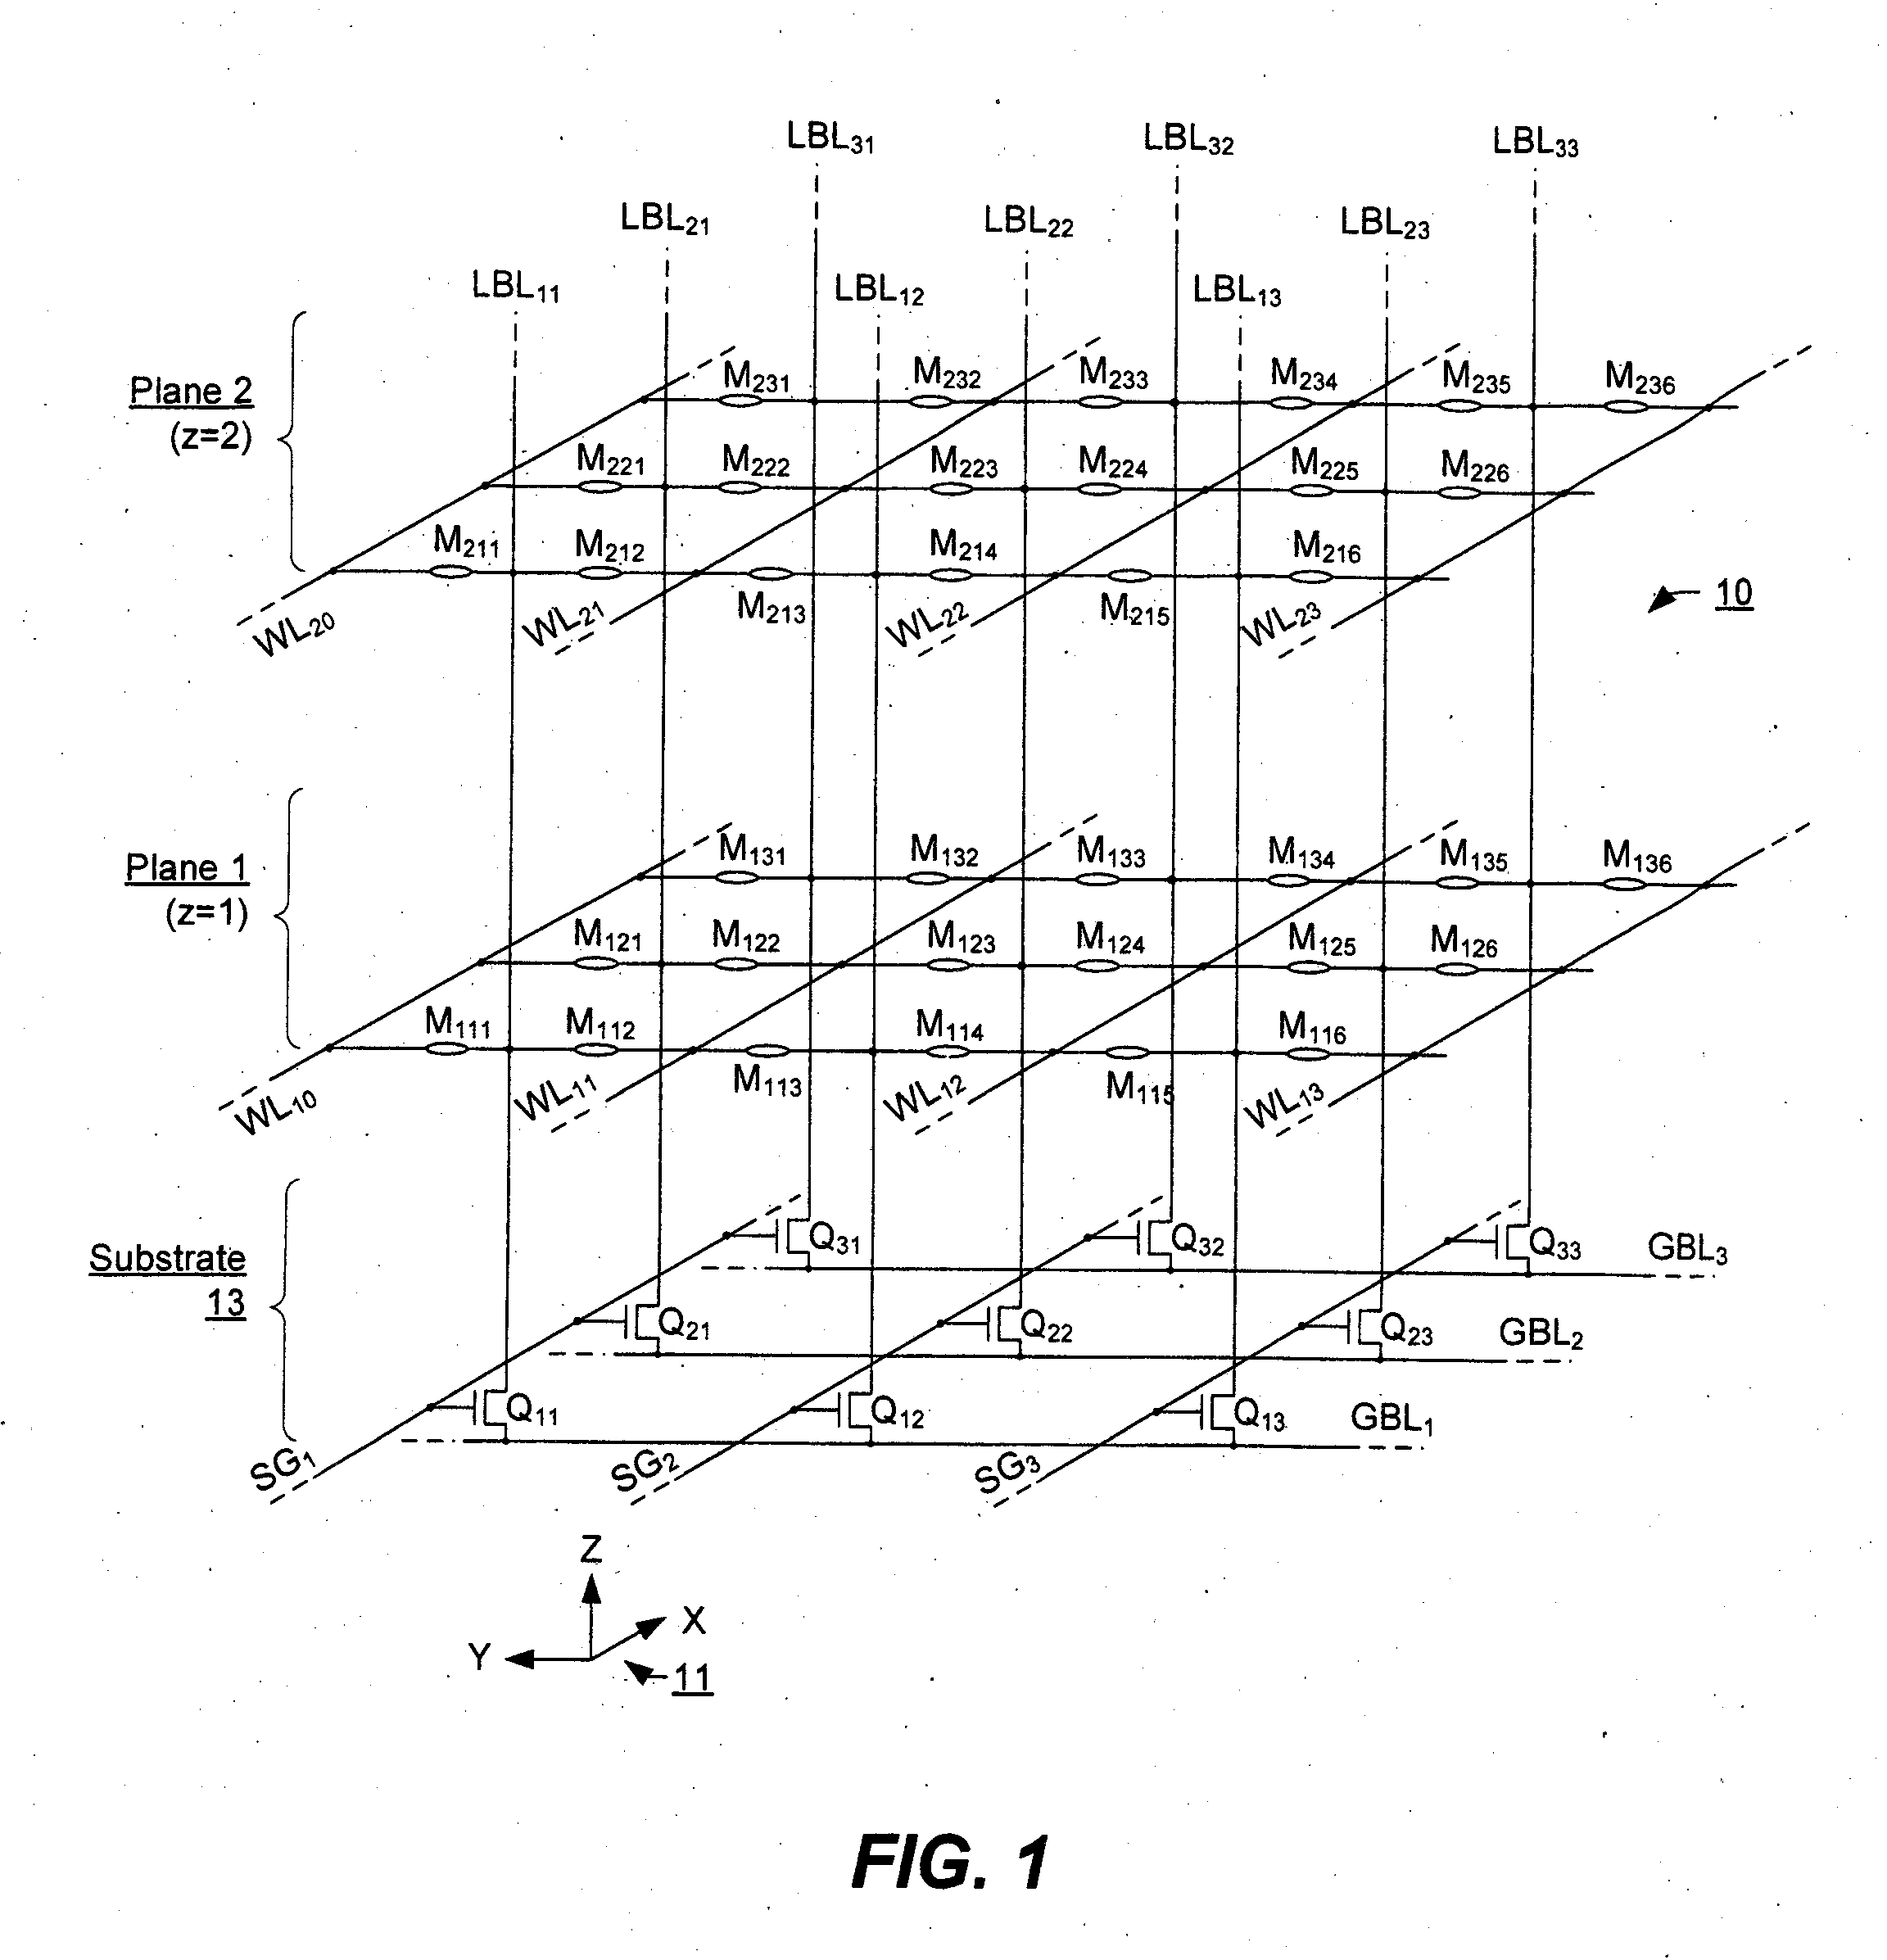 Three-Dimensional Array of Re-Programmable Non-Volatile Memory Elements Having Vertical Bit Lines and a Double-Global-Bit-Line Architecture